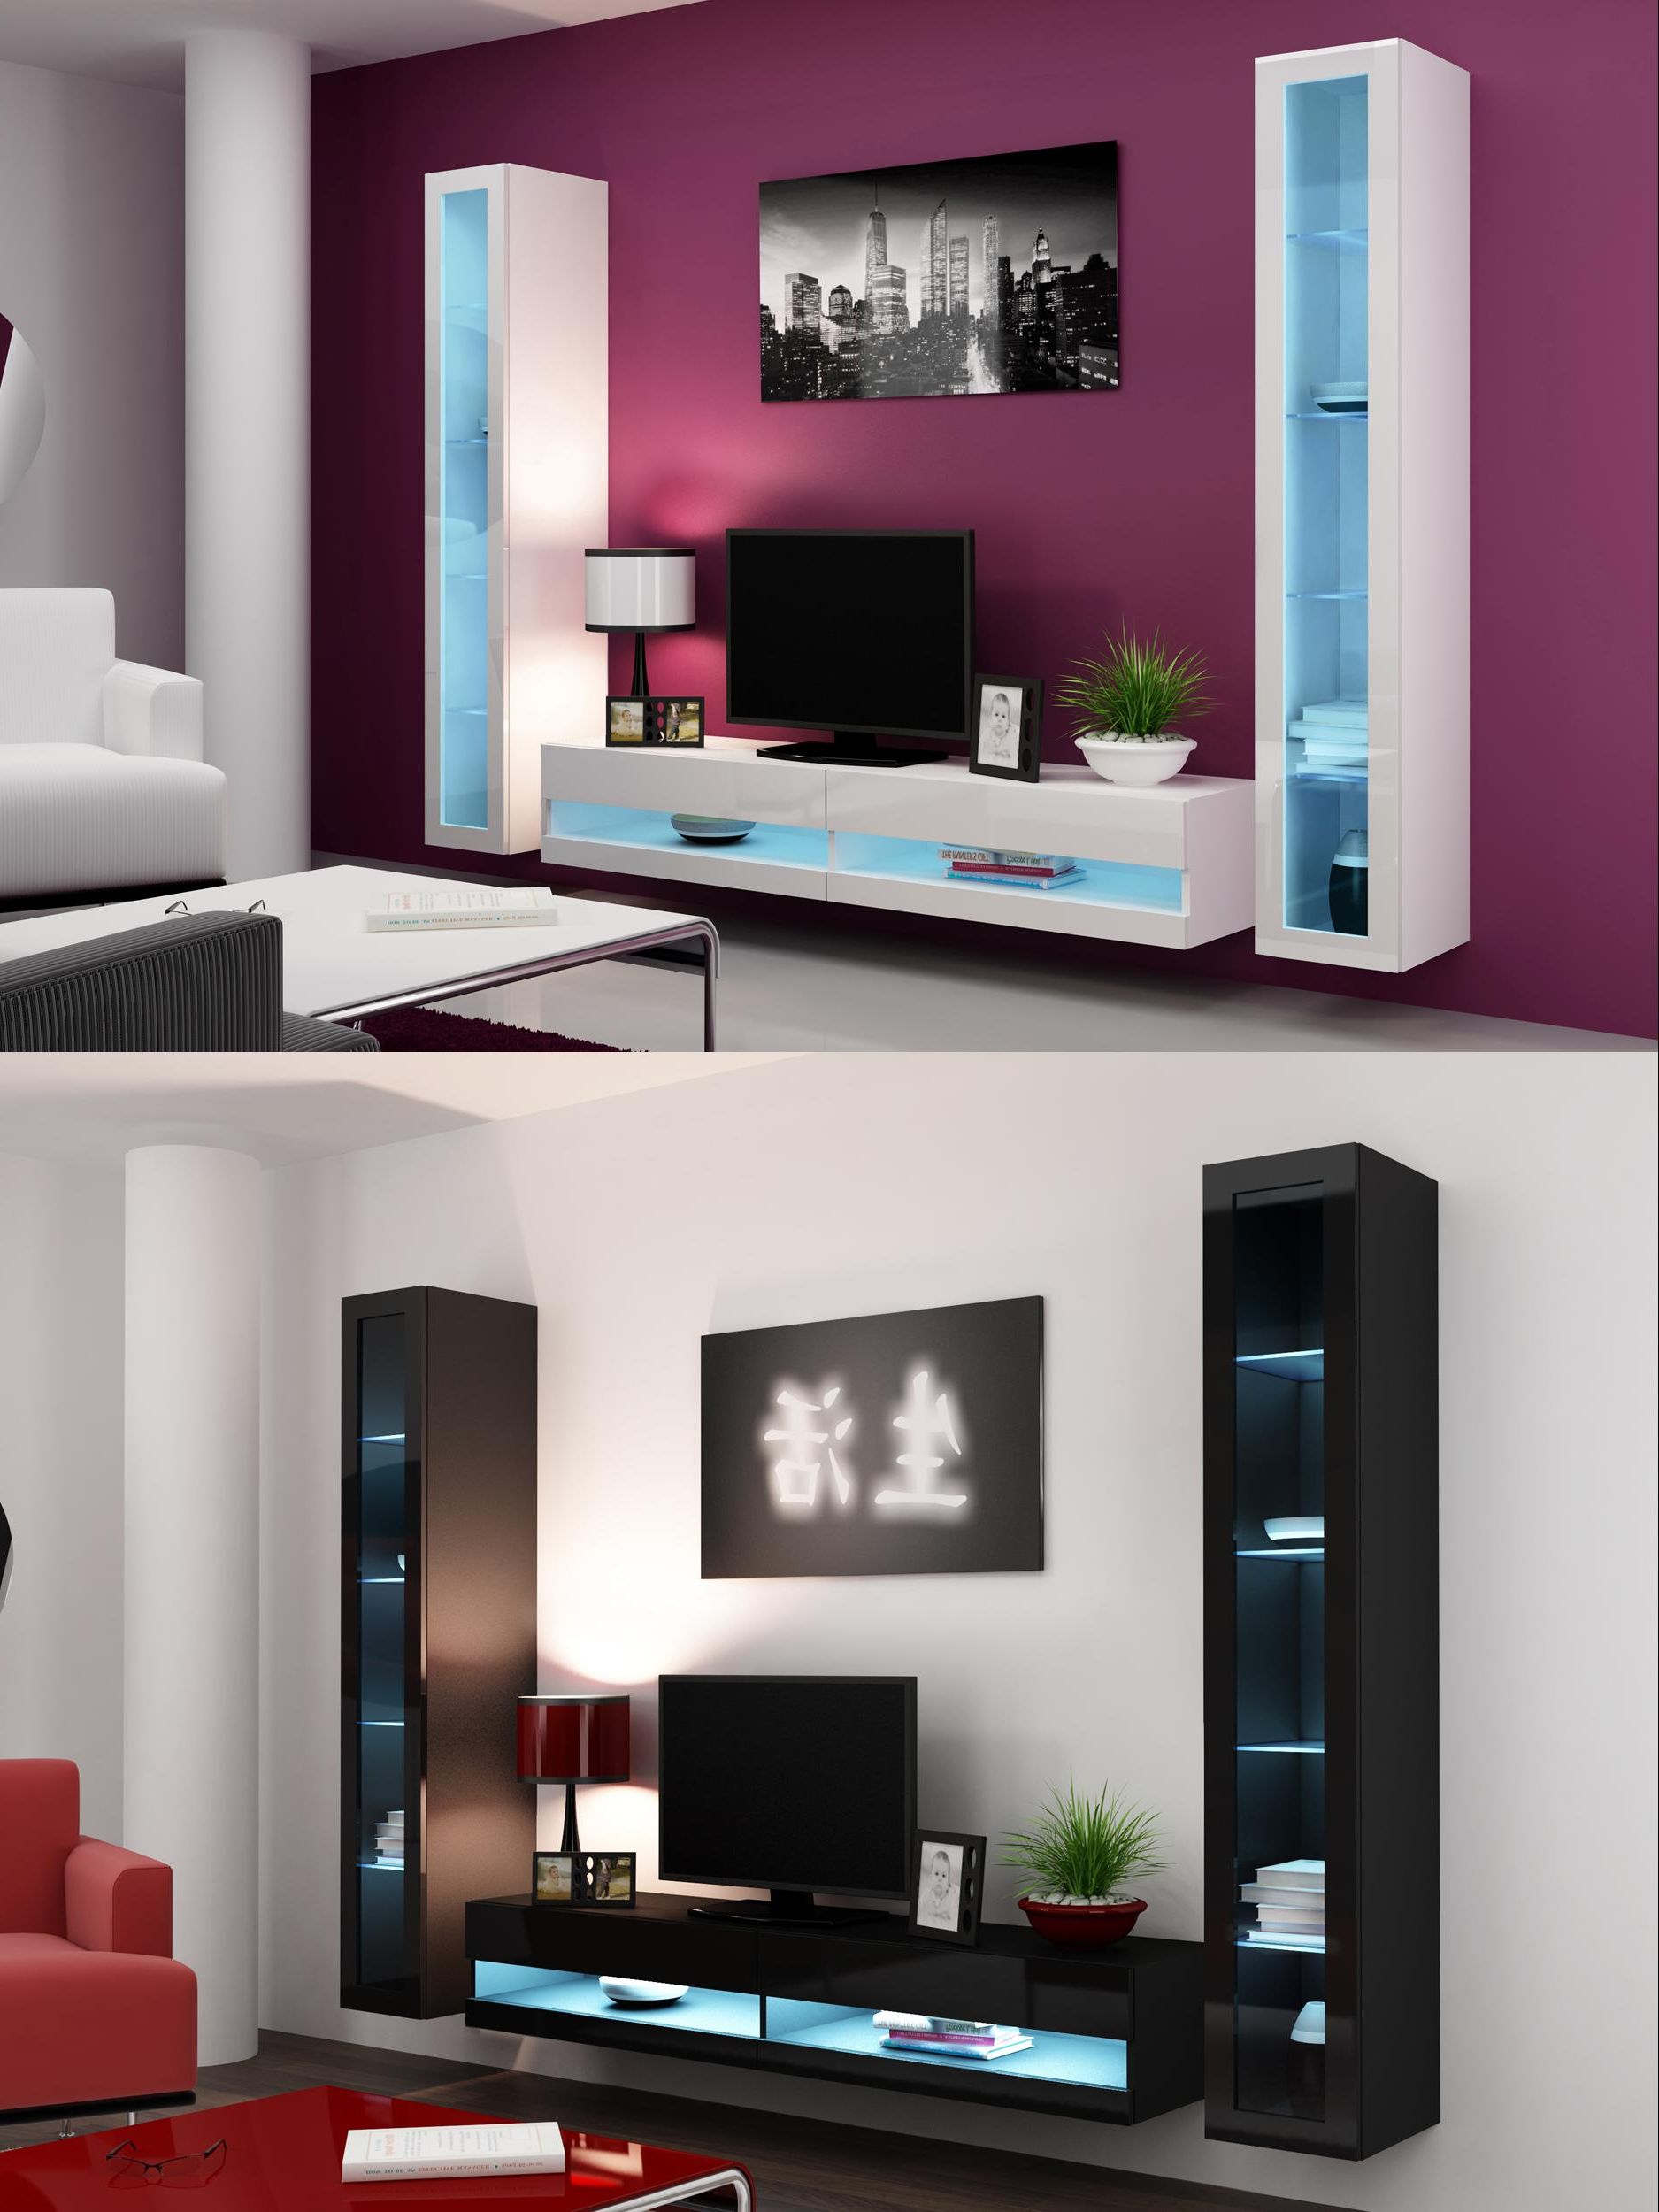 Tv Stands Design Furniture High Gloss Living Room Set With Led Throughout Latest Modular Tv Stands Furniture (View 14 of 20)